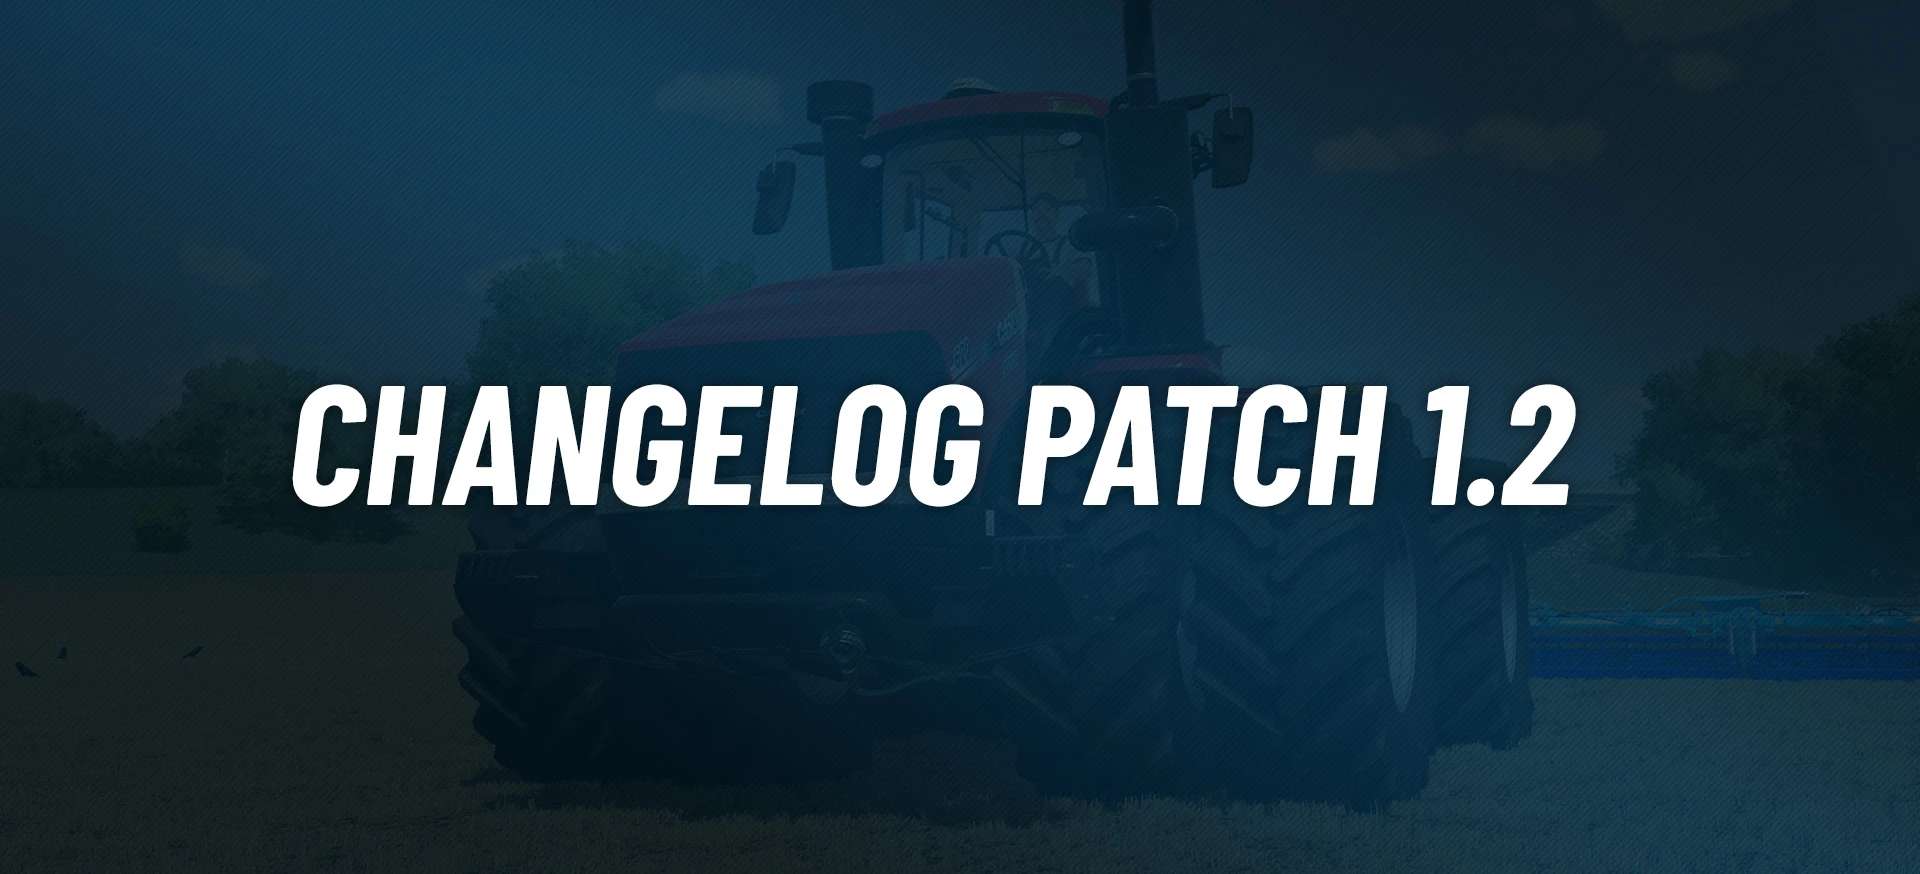 how to download latest update for farming simulator 2017 pc